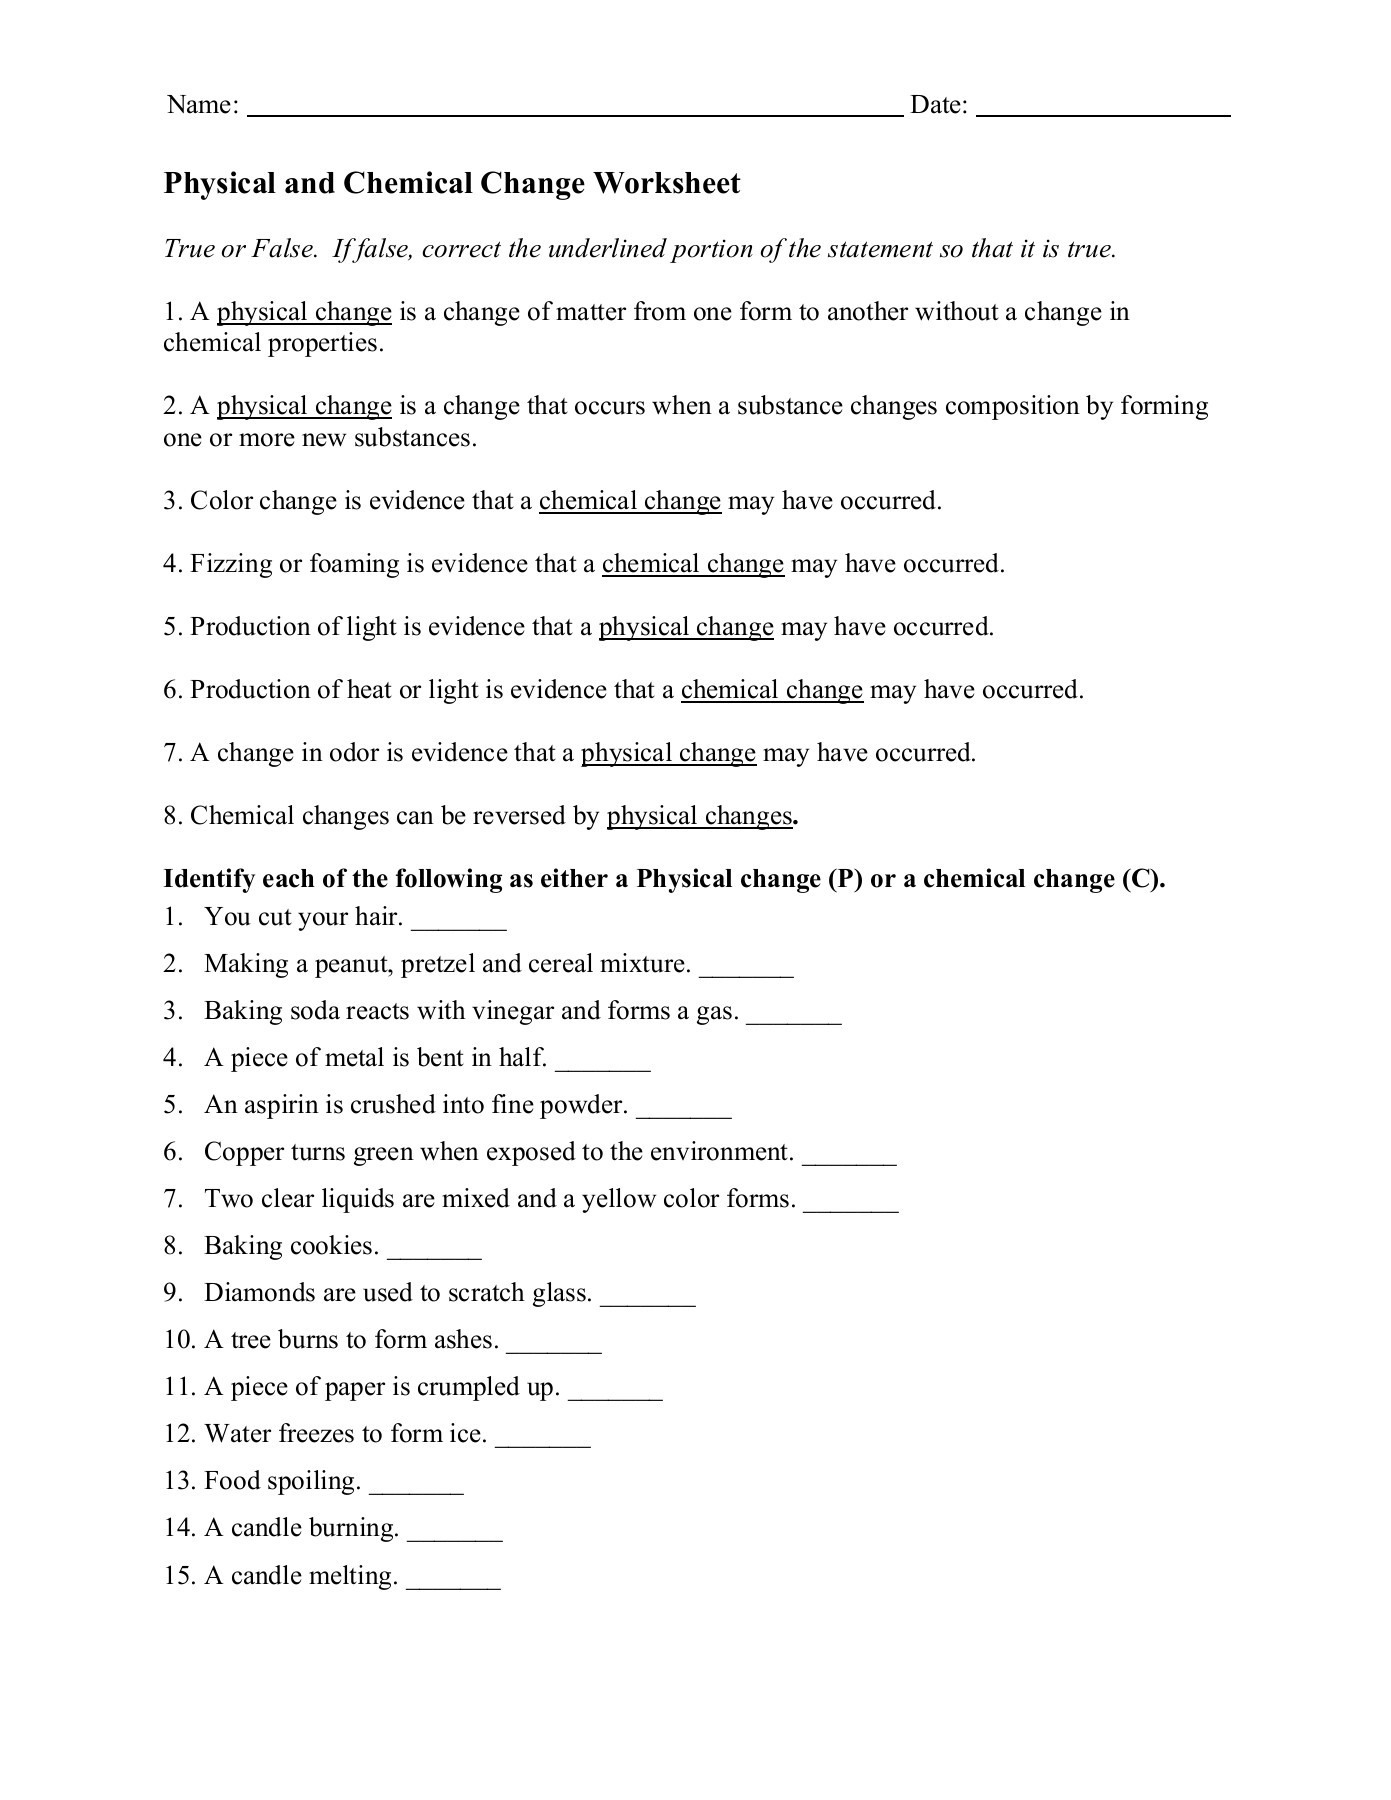 physical-and-chemical-changes-worksheet